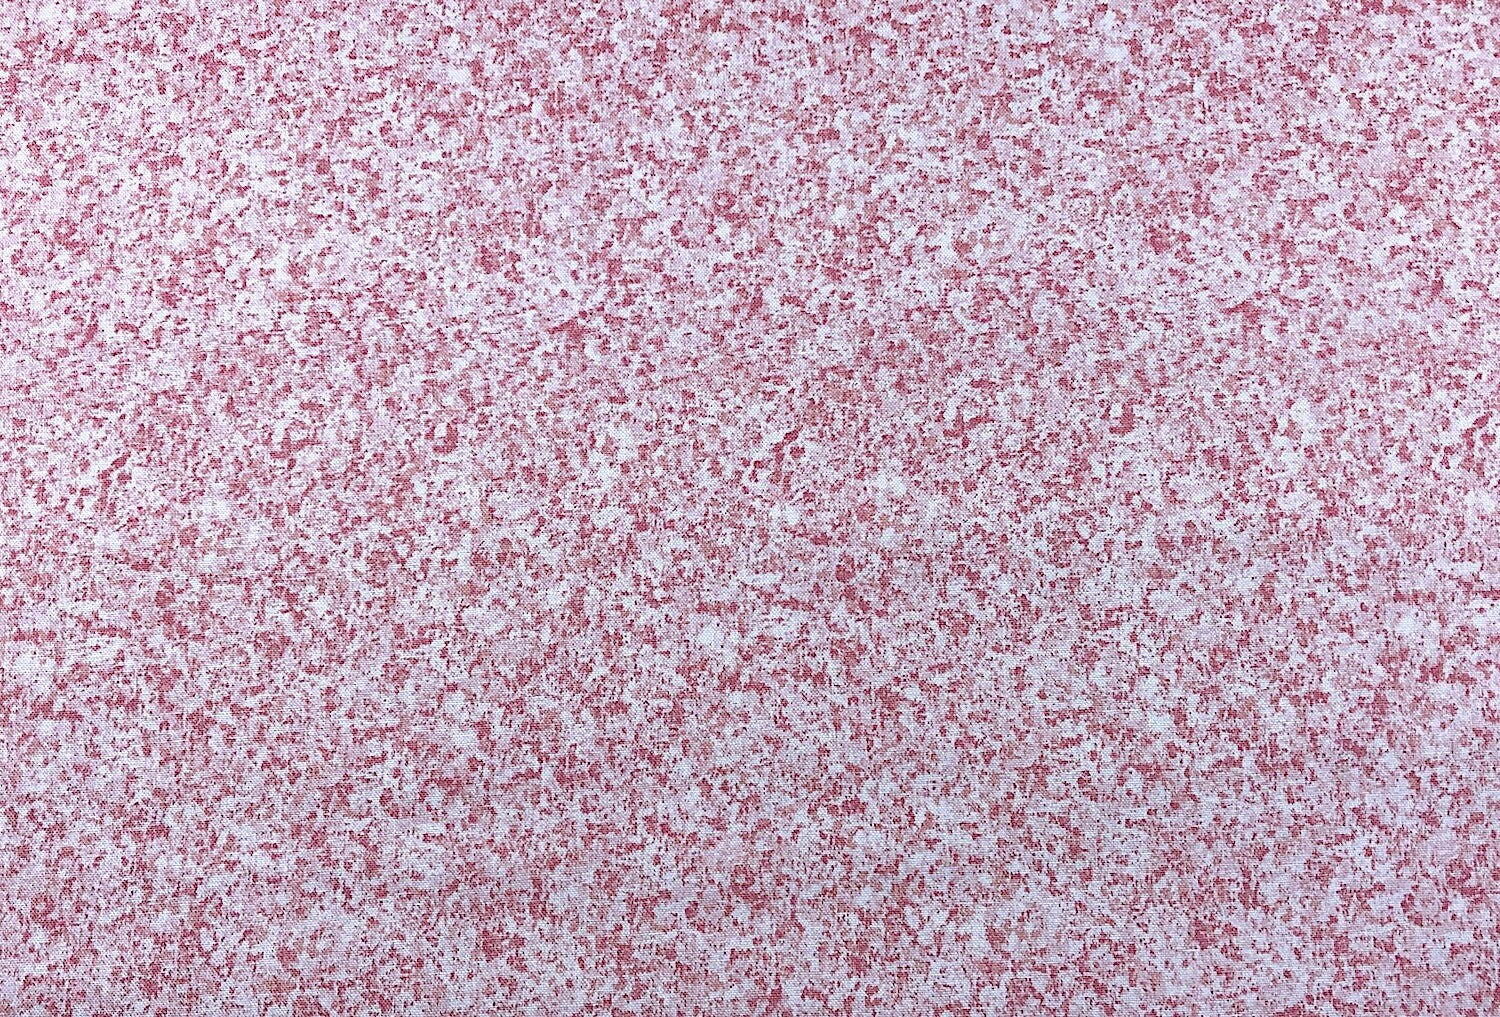 Cotton fabric covered with shades of pink.